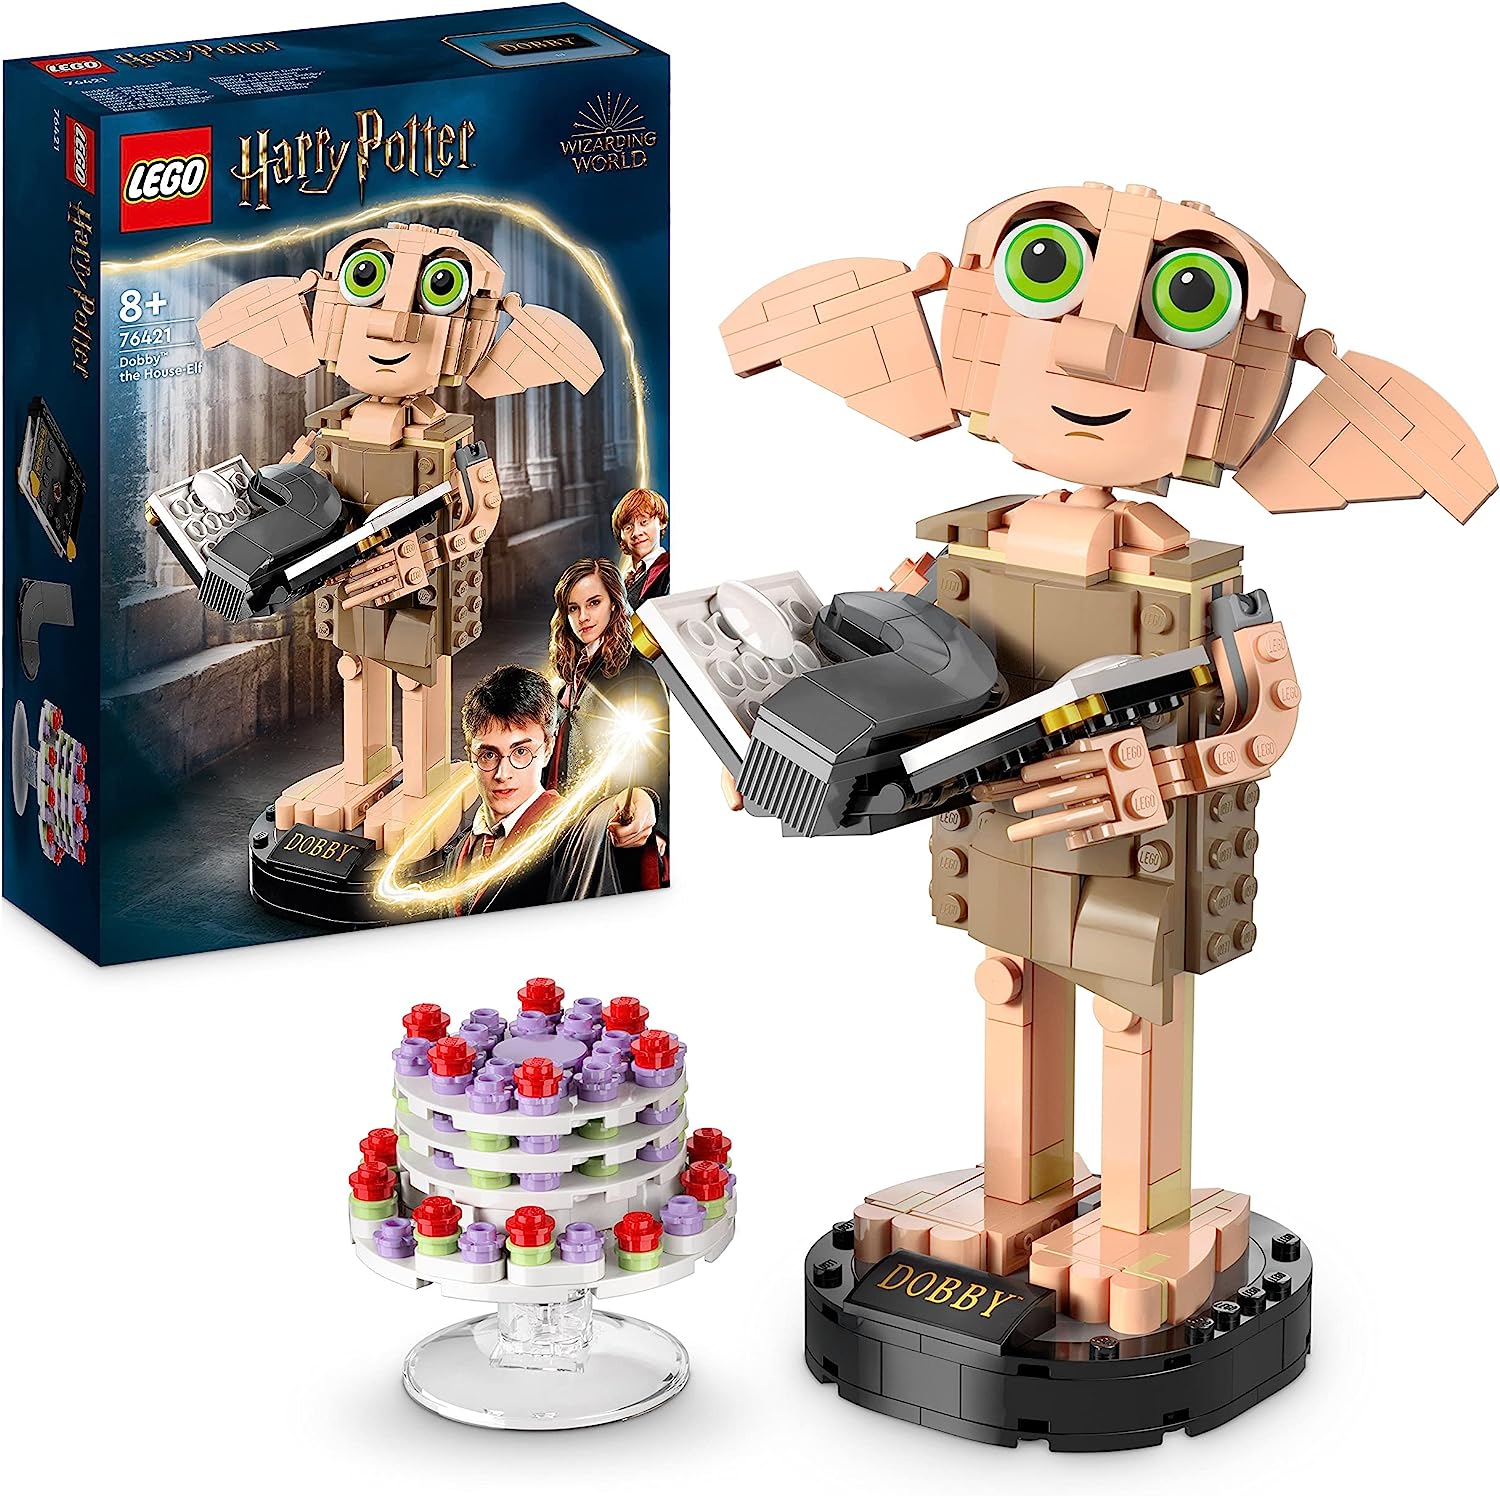 LEGO 76421 Harry Potter Dobby the House Elf Set, Movable Iconic Figure, Toy, Bedroom Accessory & Decoration, Character Collection, Gift for Girls, Boys, Teens and All Fans From 8 Years